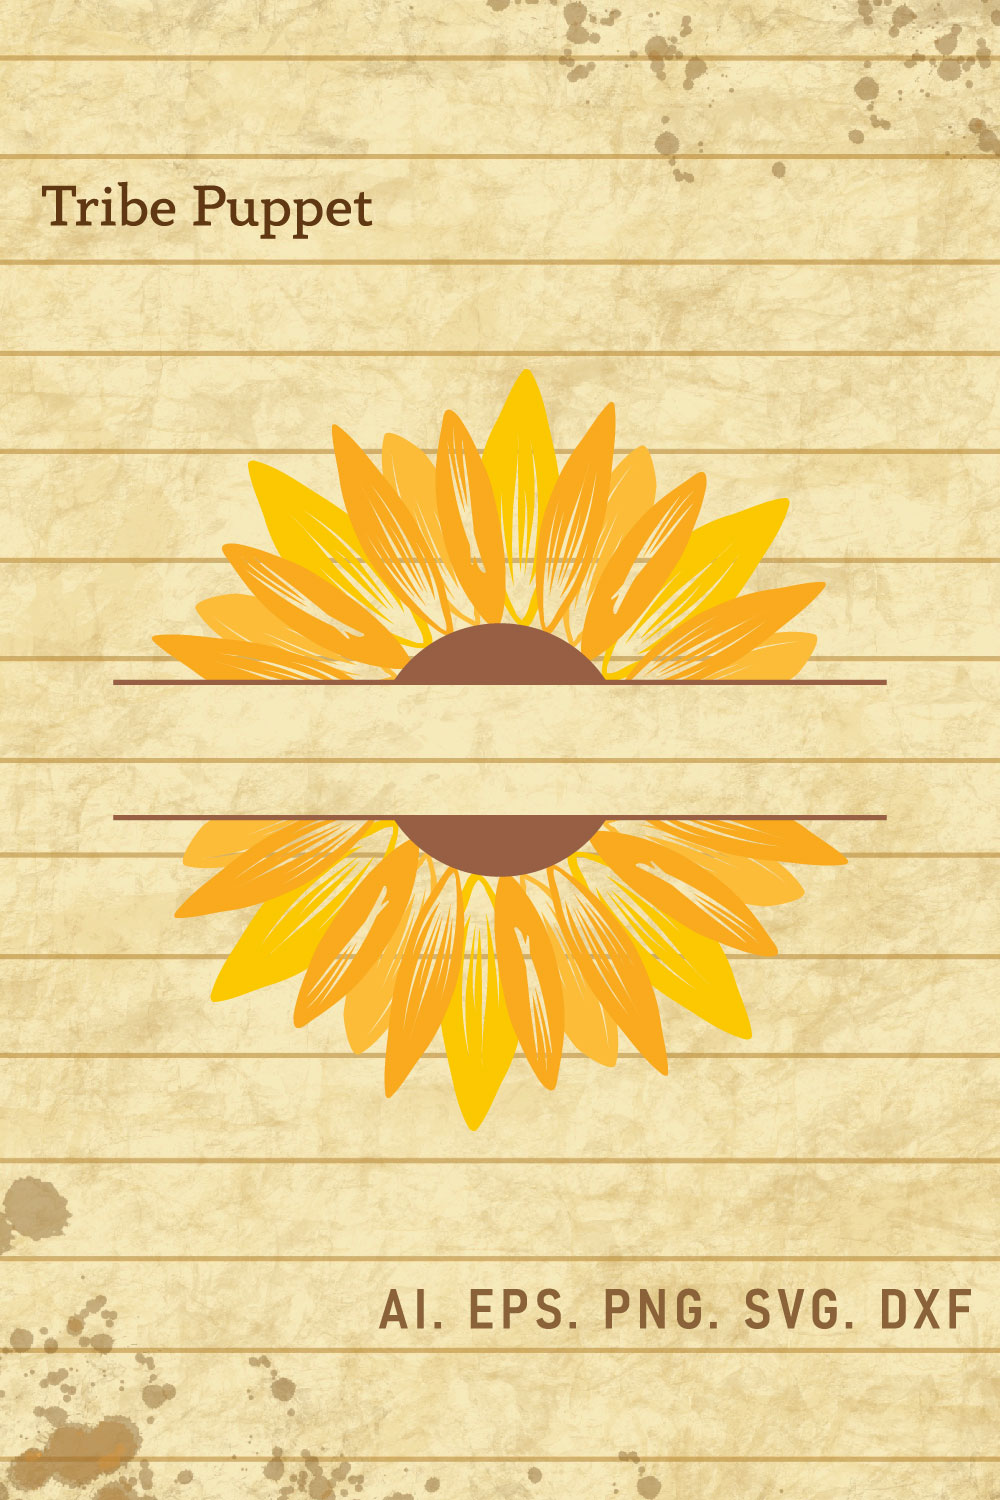 Sunflower 17 pinterest preview image.